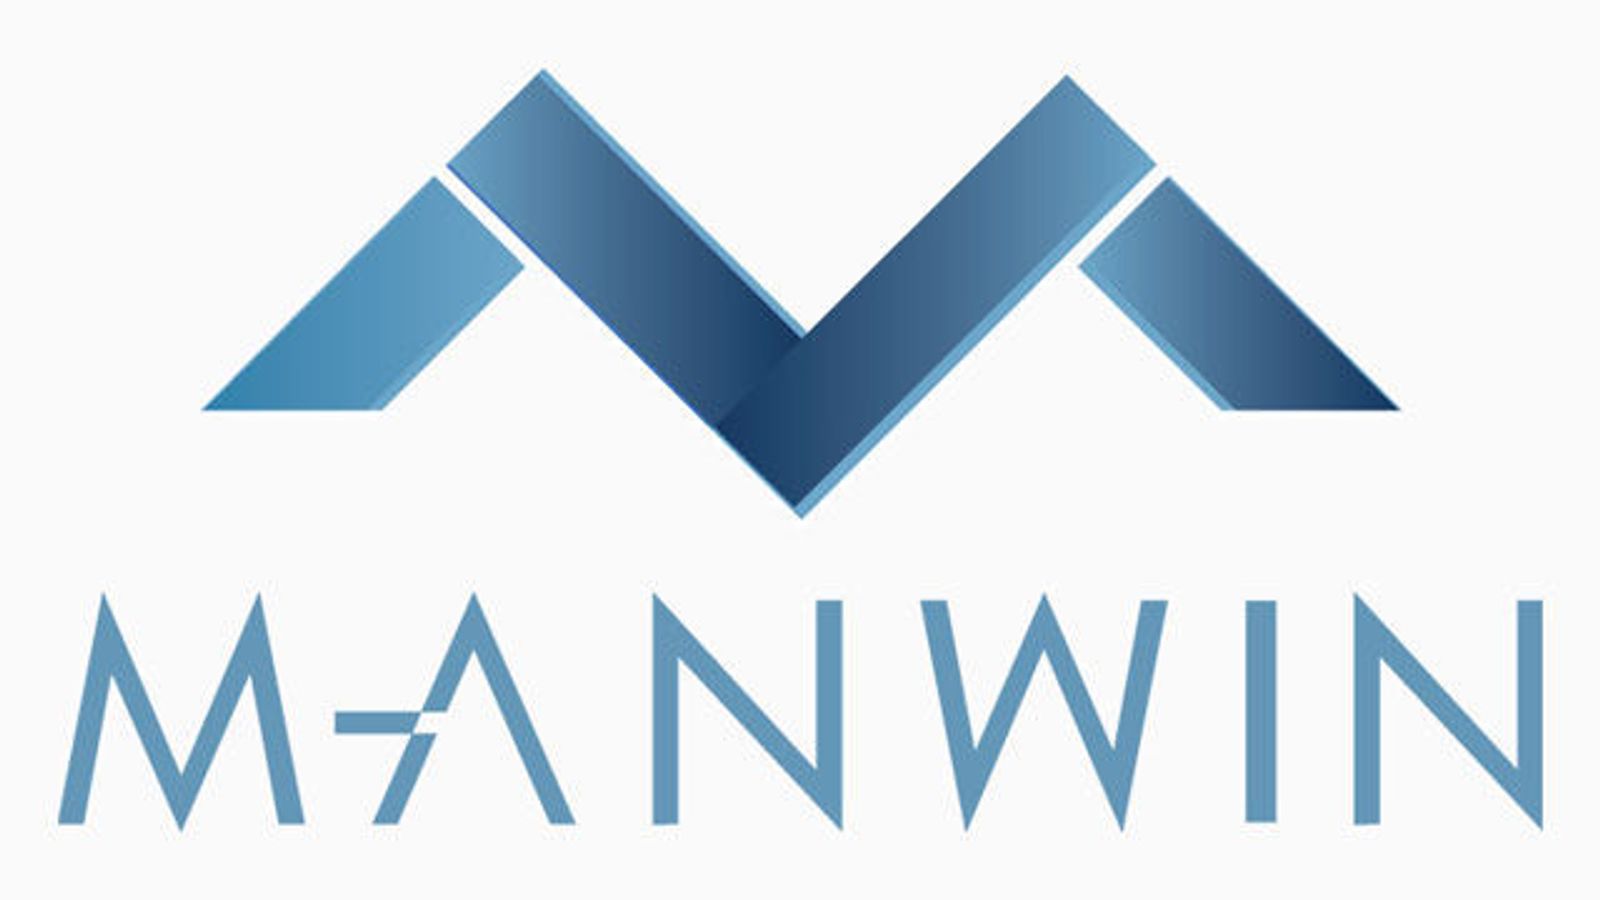 Manwin Denies Relations with Filesonic or Any File Sharing Site